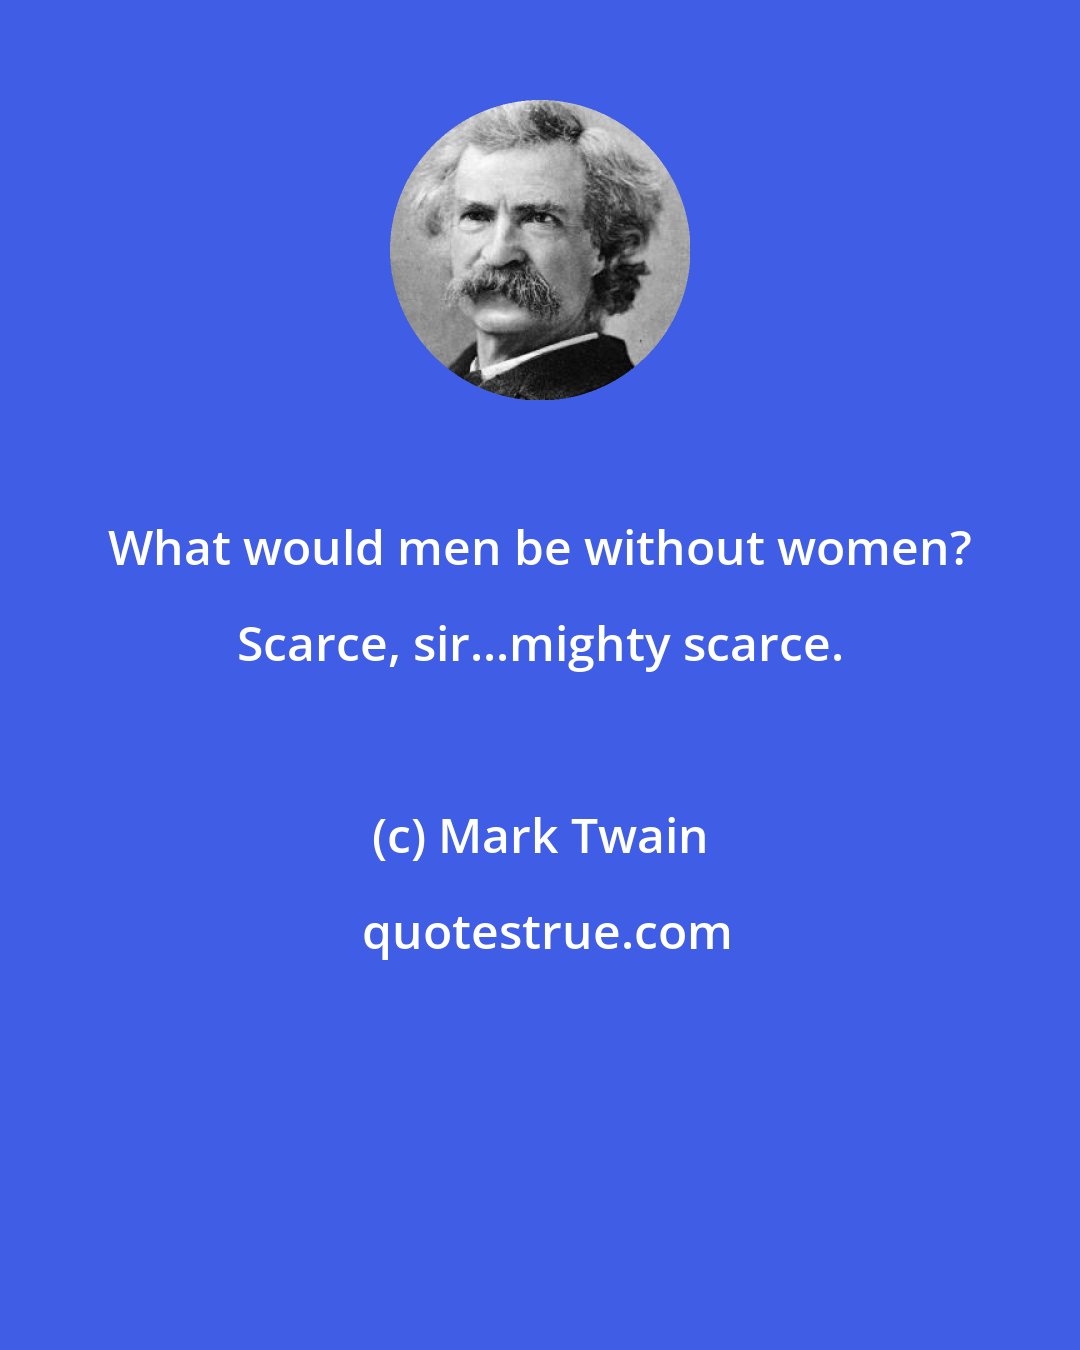 Mark Twain: What would men be without women? Scarce, sir...mighty scarce.